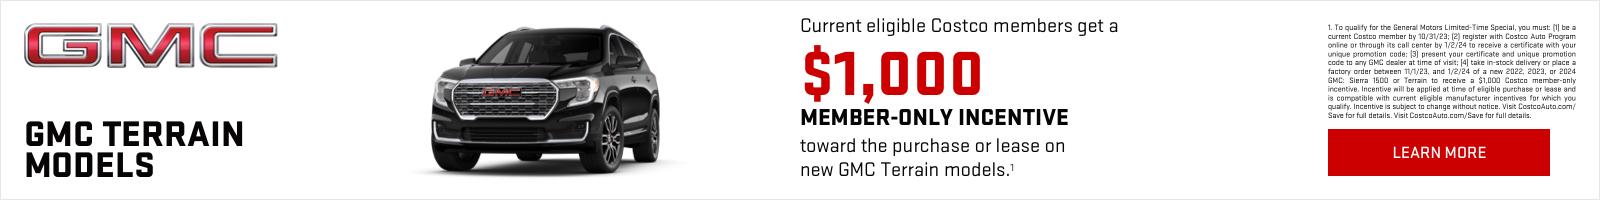 CURRENT ELIGIBLE COSTCO MEMBERS GET A
$1,000 MEMBER-ONLY INCENTIVE
TOWARD THE PURCHASE OR LEASE
ON NEW GMC TERRAIN MODELS1